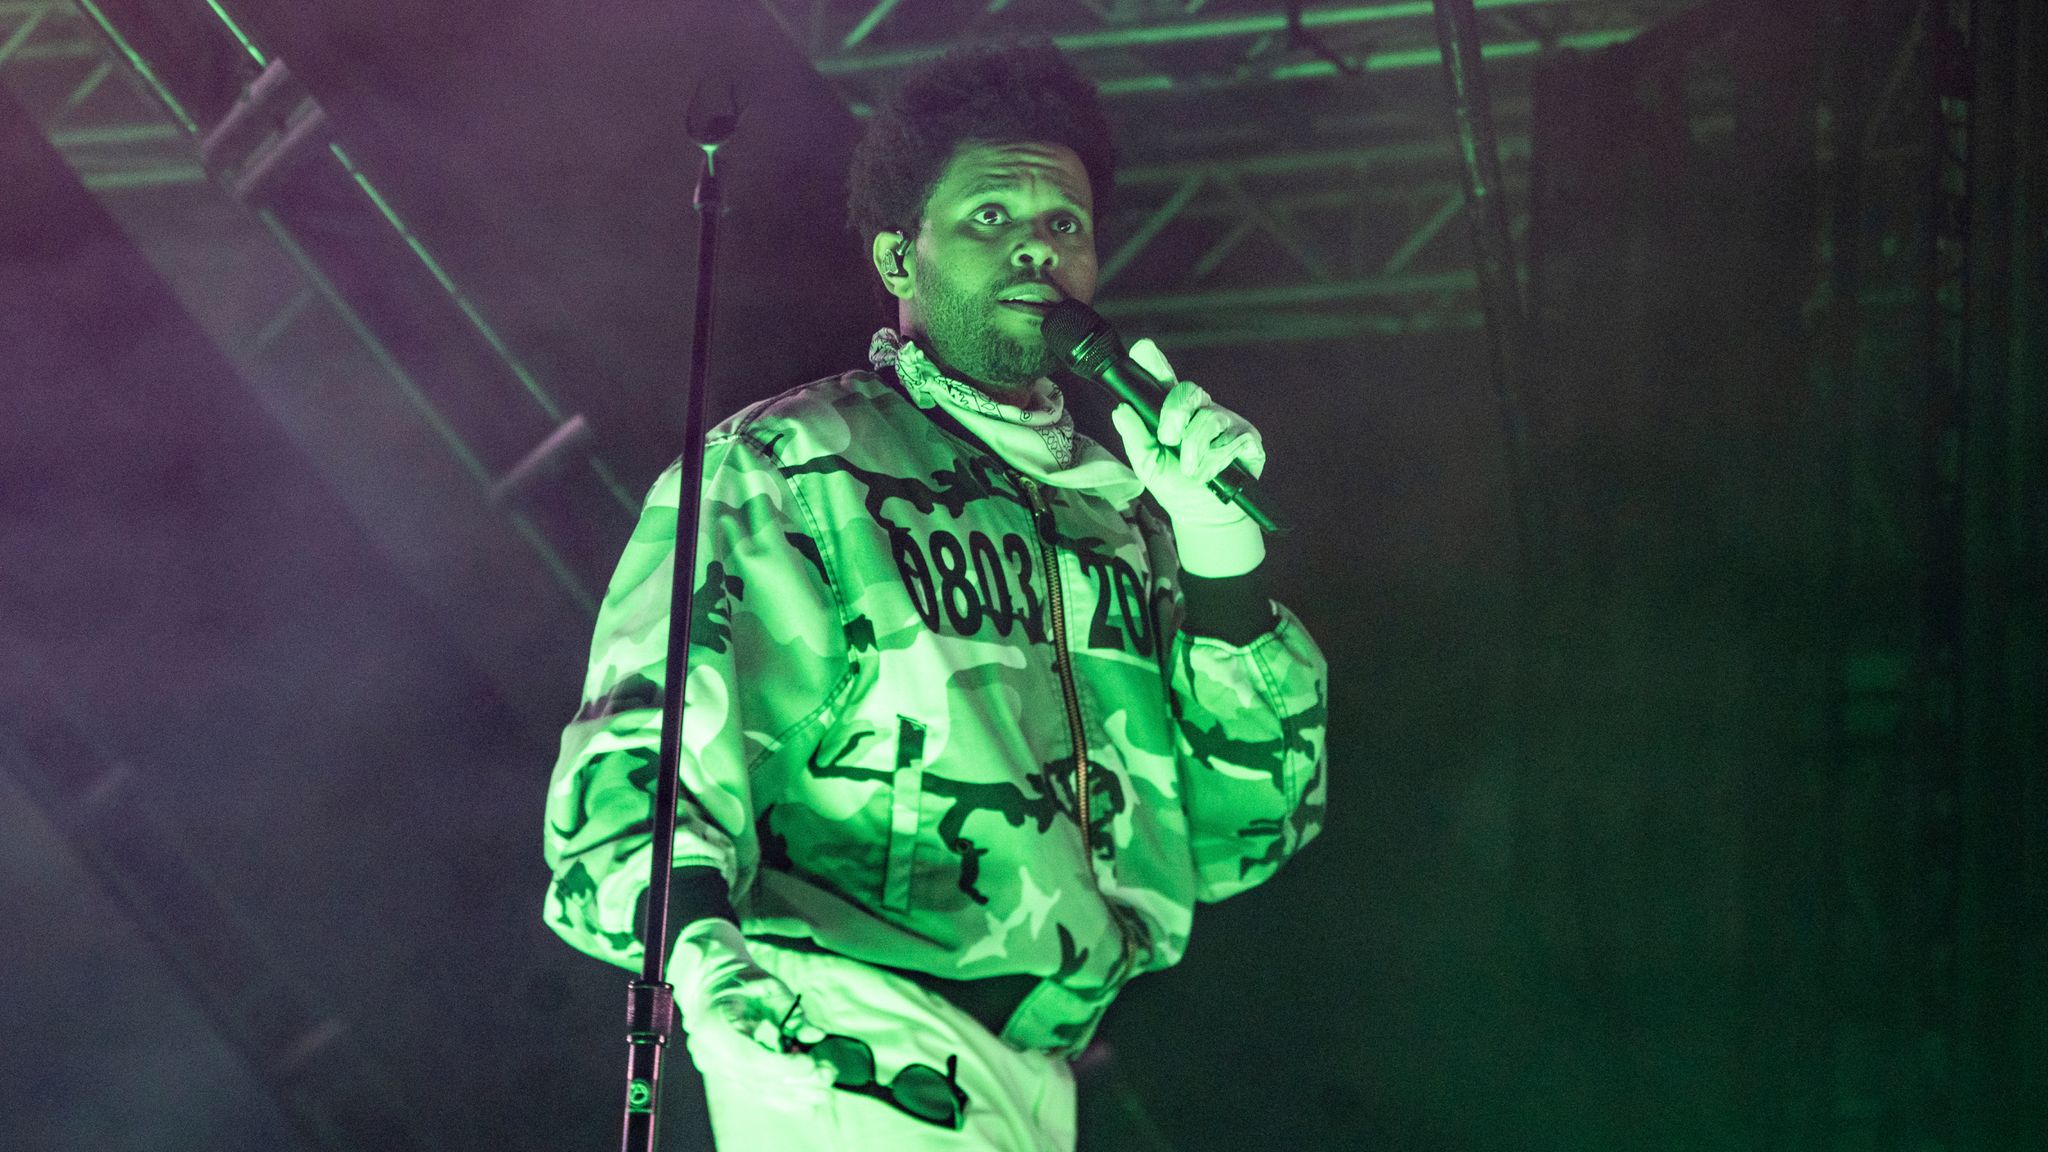 How the Weeknd Became One of the World's Biggest Pop Stars